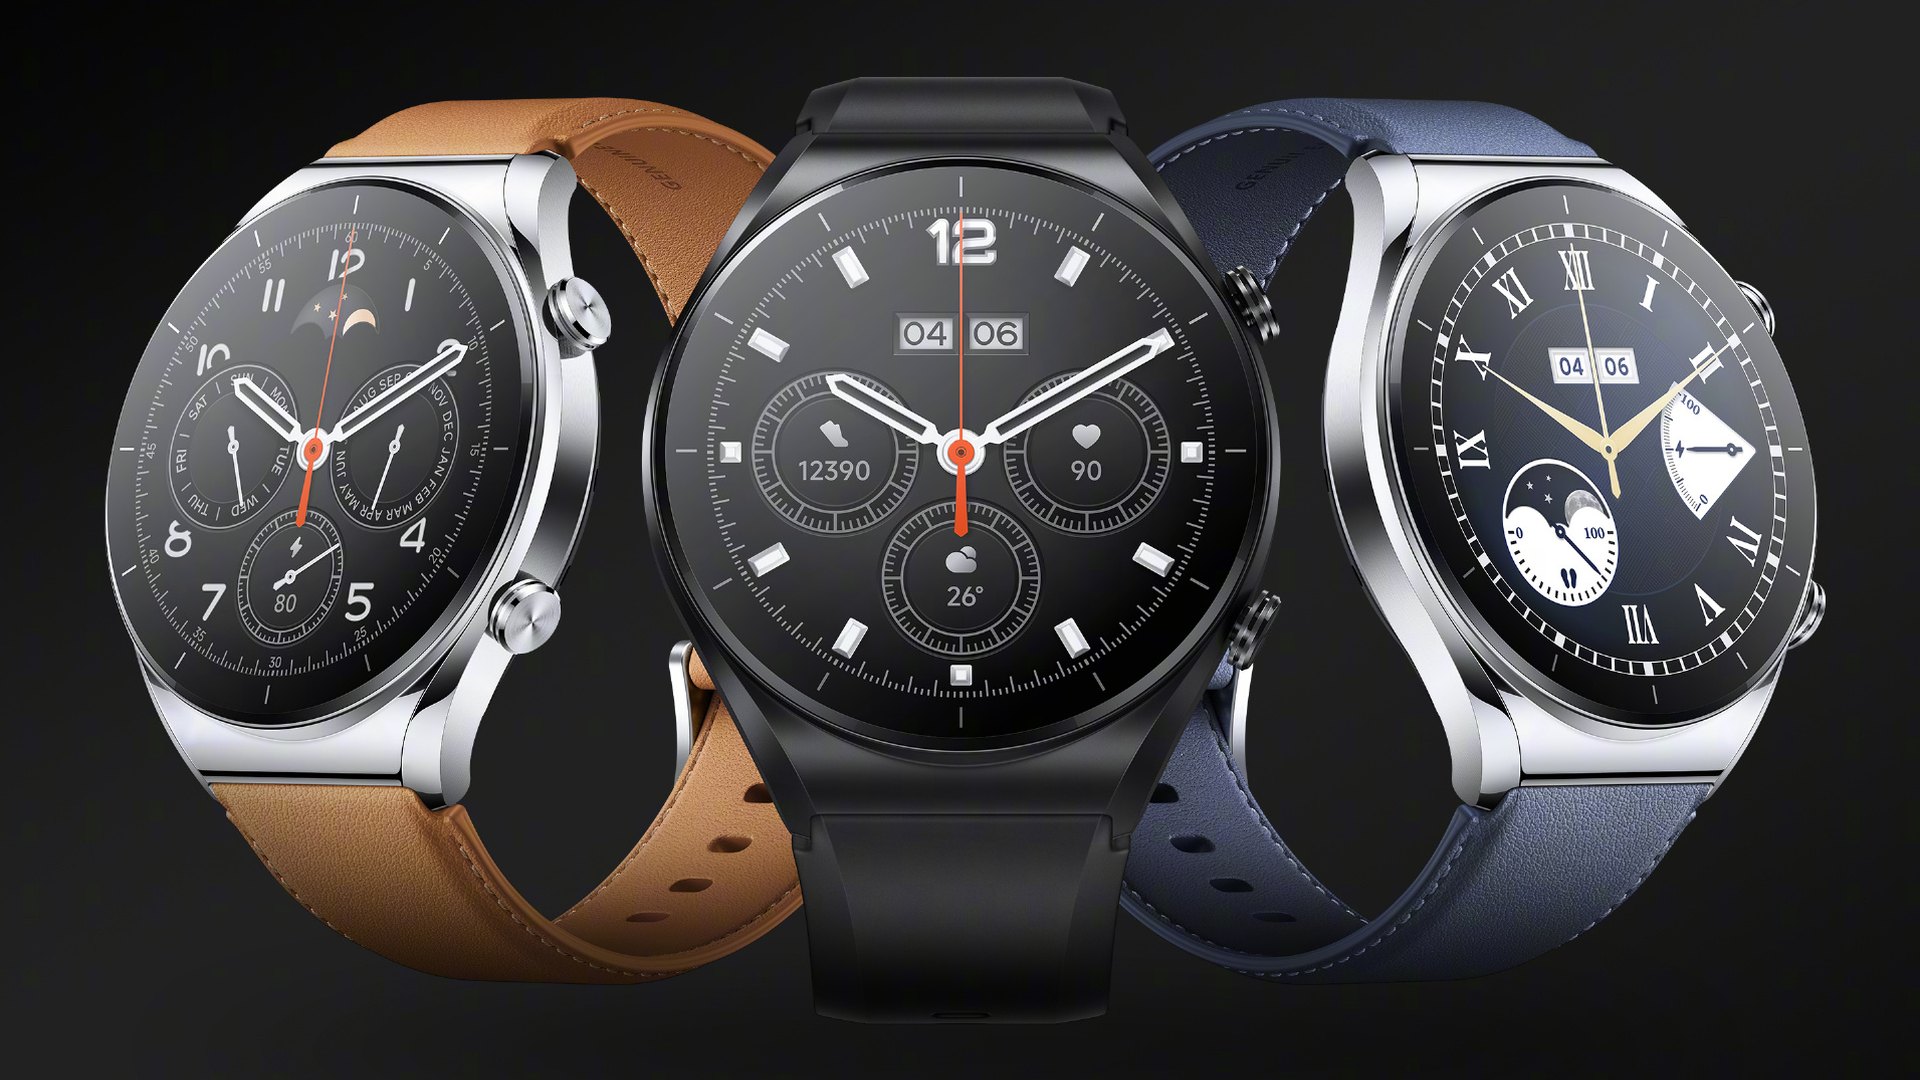 Xiaomi Watch S1 smartwatch goes official in China - Android Authority